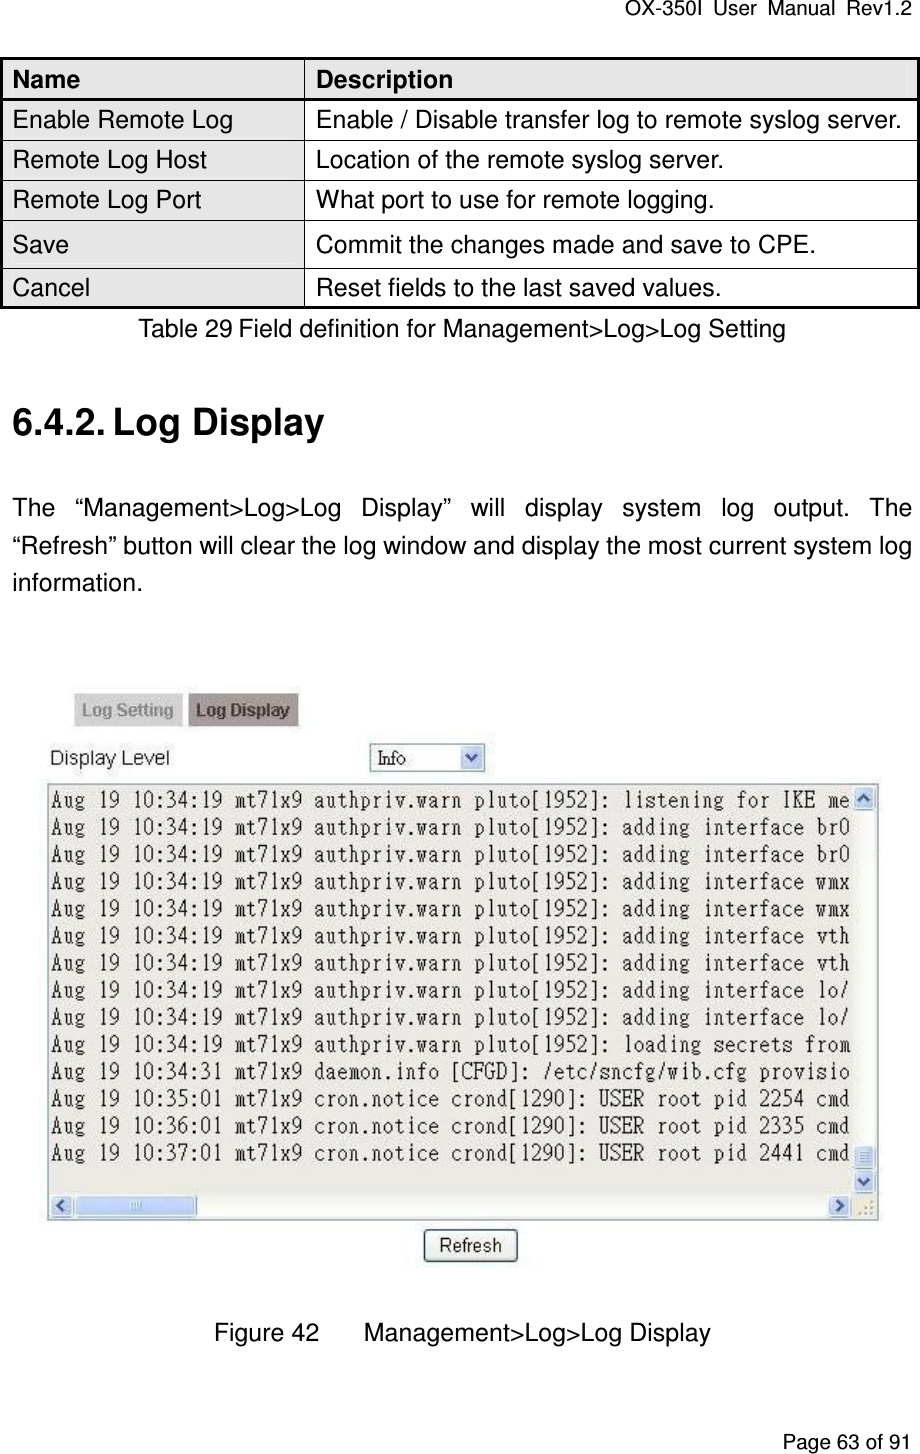 OX-350I  User  Manual  Rev1.2 Page 63 of 91 Name  Description Enable Remote Log  Enable / Disable transfer log to remote syslog server. Remote Log Host  Location of the remote syslog server. Remote Log Port  What port to use for remote logging. Save  Commit the changes made and save to CPE. Cancel  Reset fields to the last saved values. Table 29 Field definition for Management&gt;Log&gt;Log Setting 6.4.2. Log Display The  “Management&gt;Log&gt;Log  Display”  will  display  system  log  output.  The “Refresh” button will clear the log window and display the most current system log information.   Figure 42  Management&gt;Log&gt;Log Display 